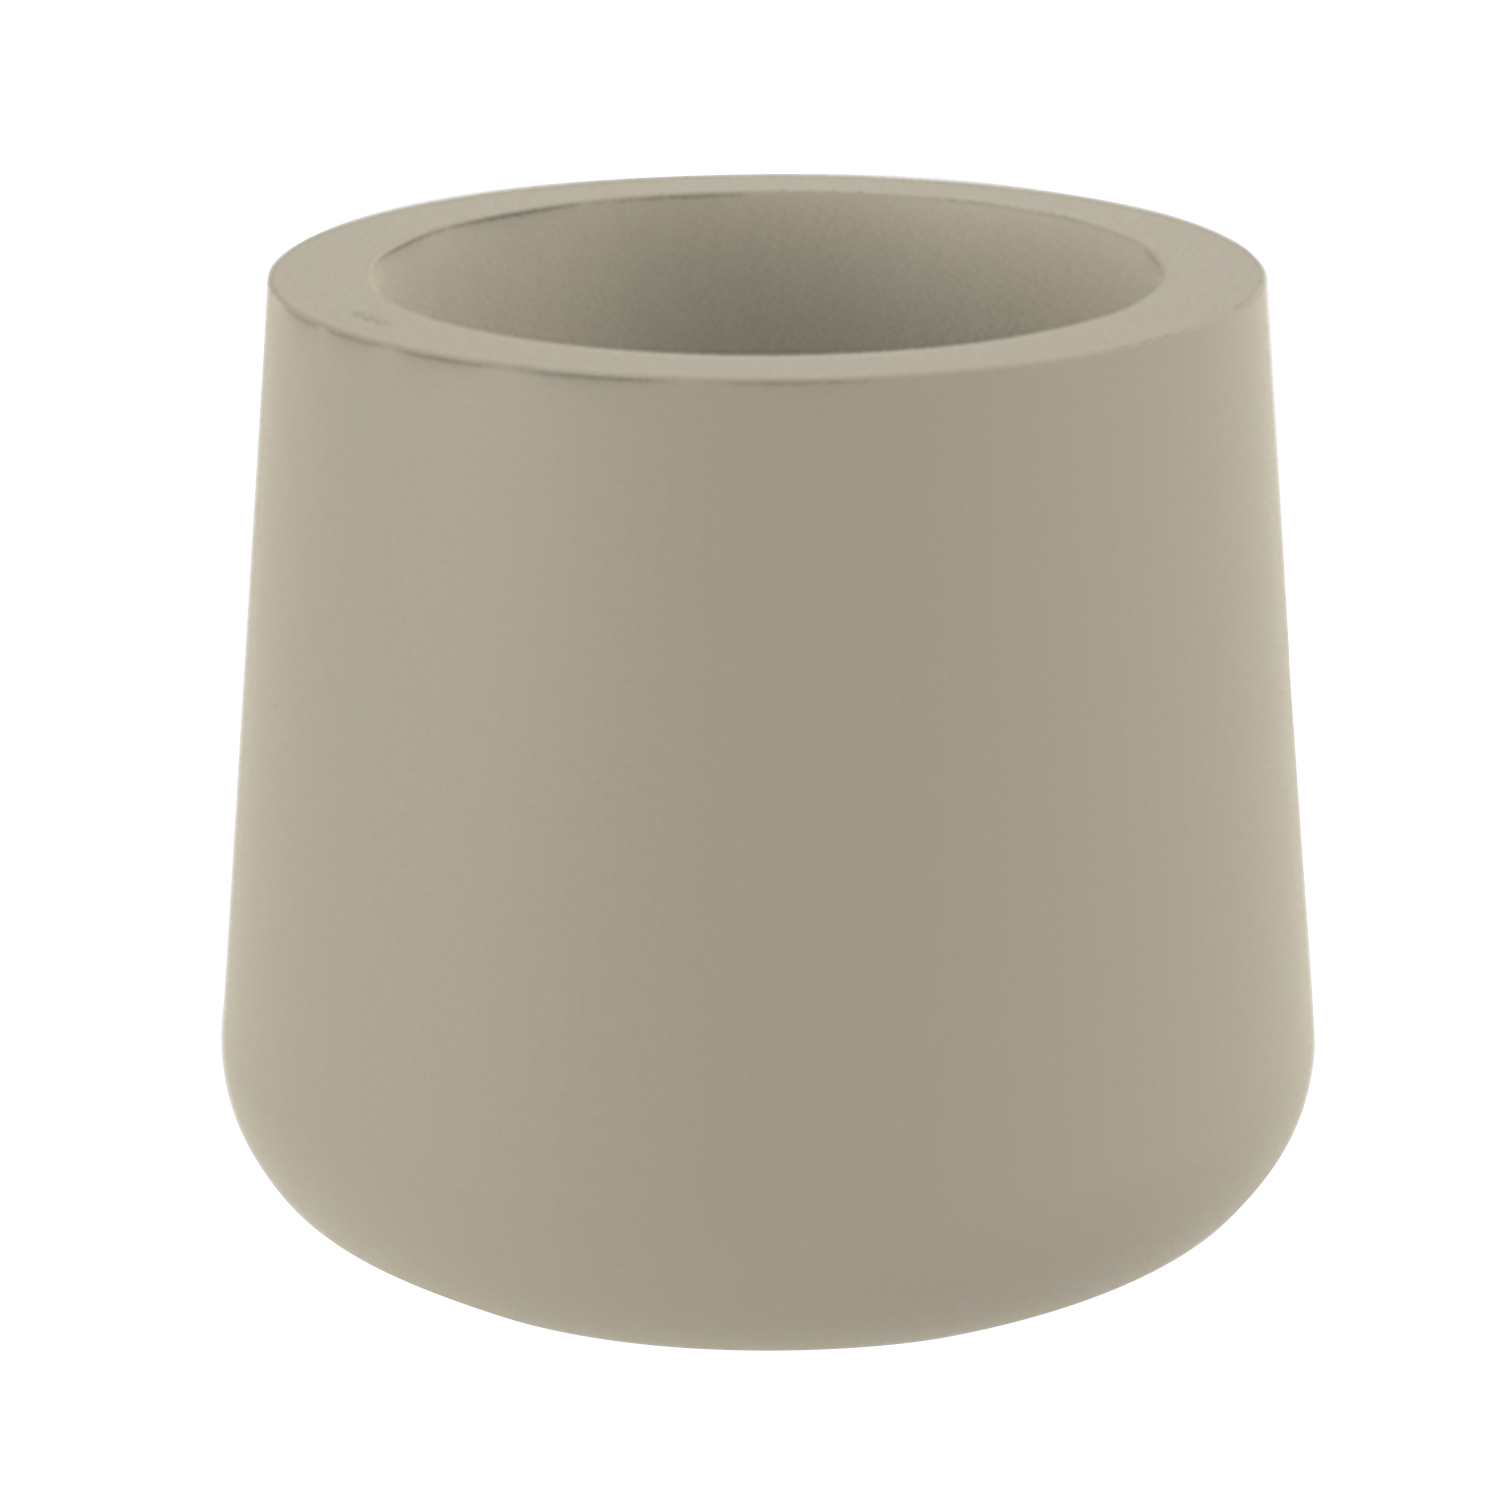 Sanipex Group - Ulm Outdoor Round Planter Global